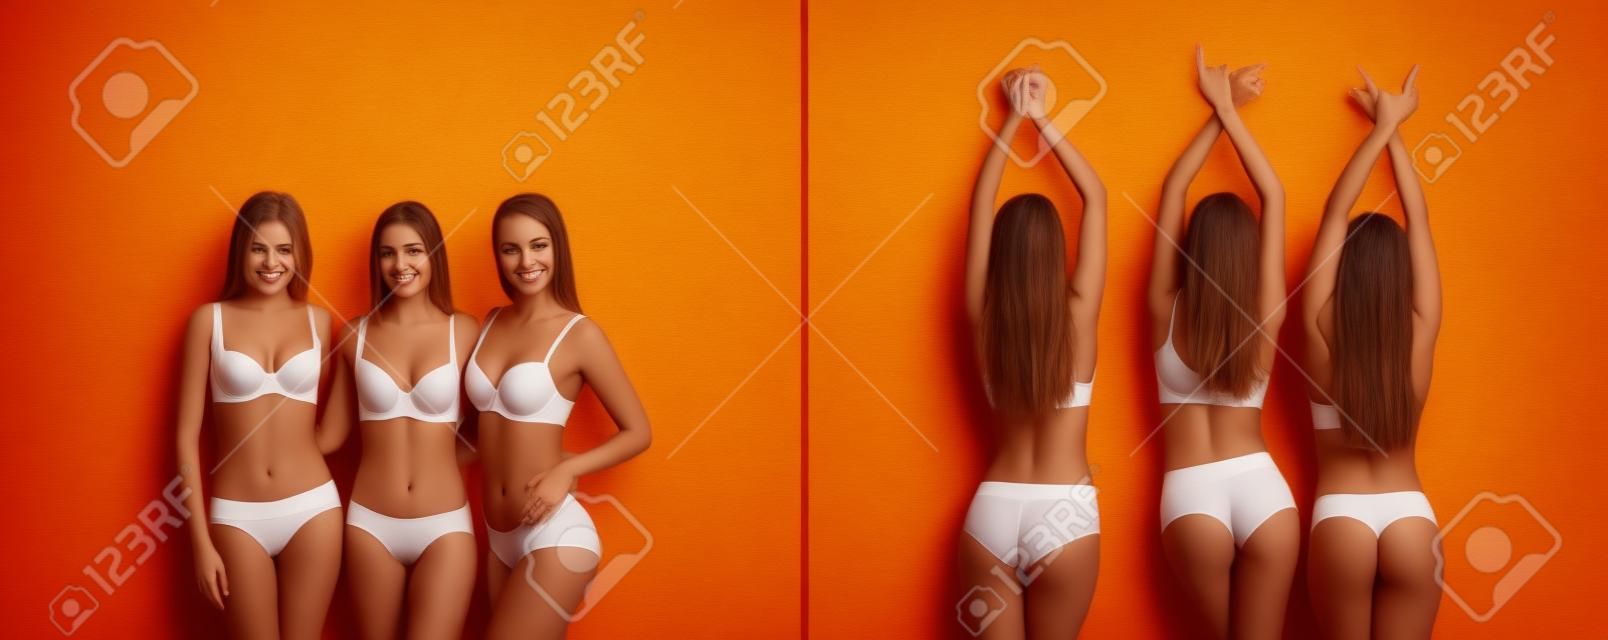 From Behind The Women's Underwear Stock Photo, Picture and Royalty